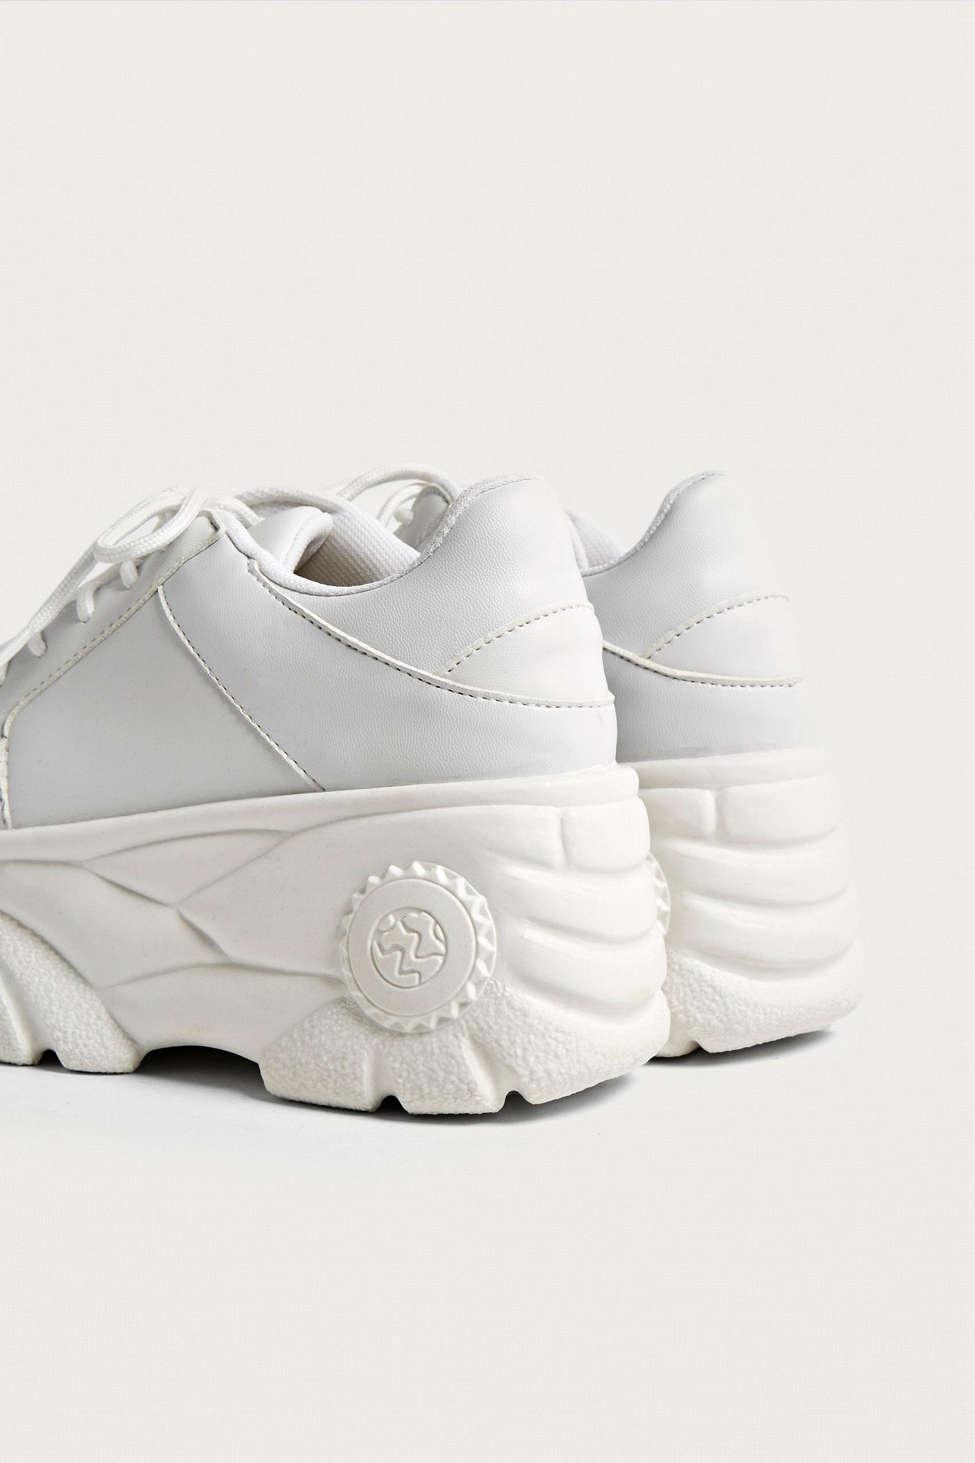 Urban Outfitters Uo Tyson White Faux 